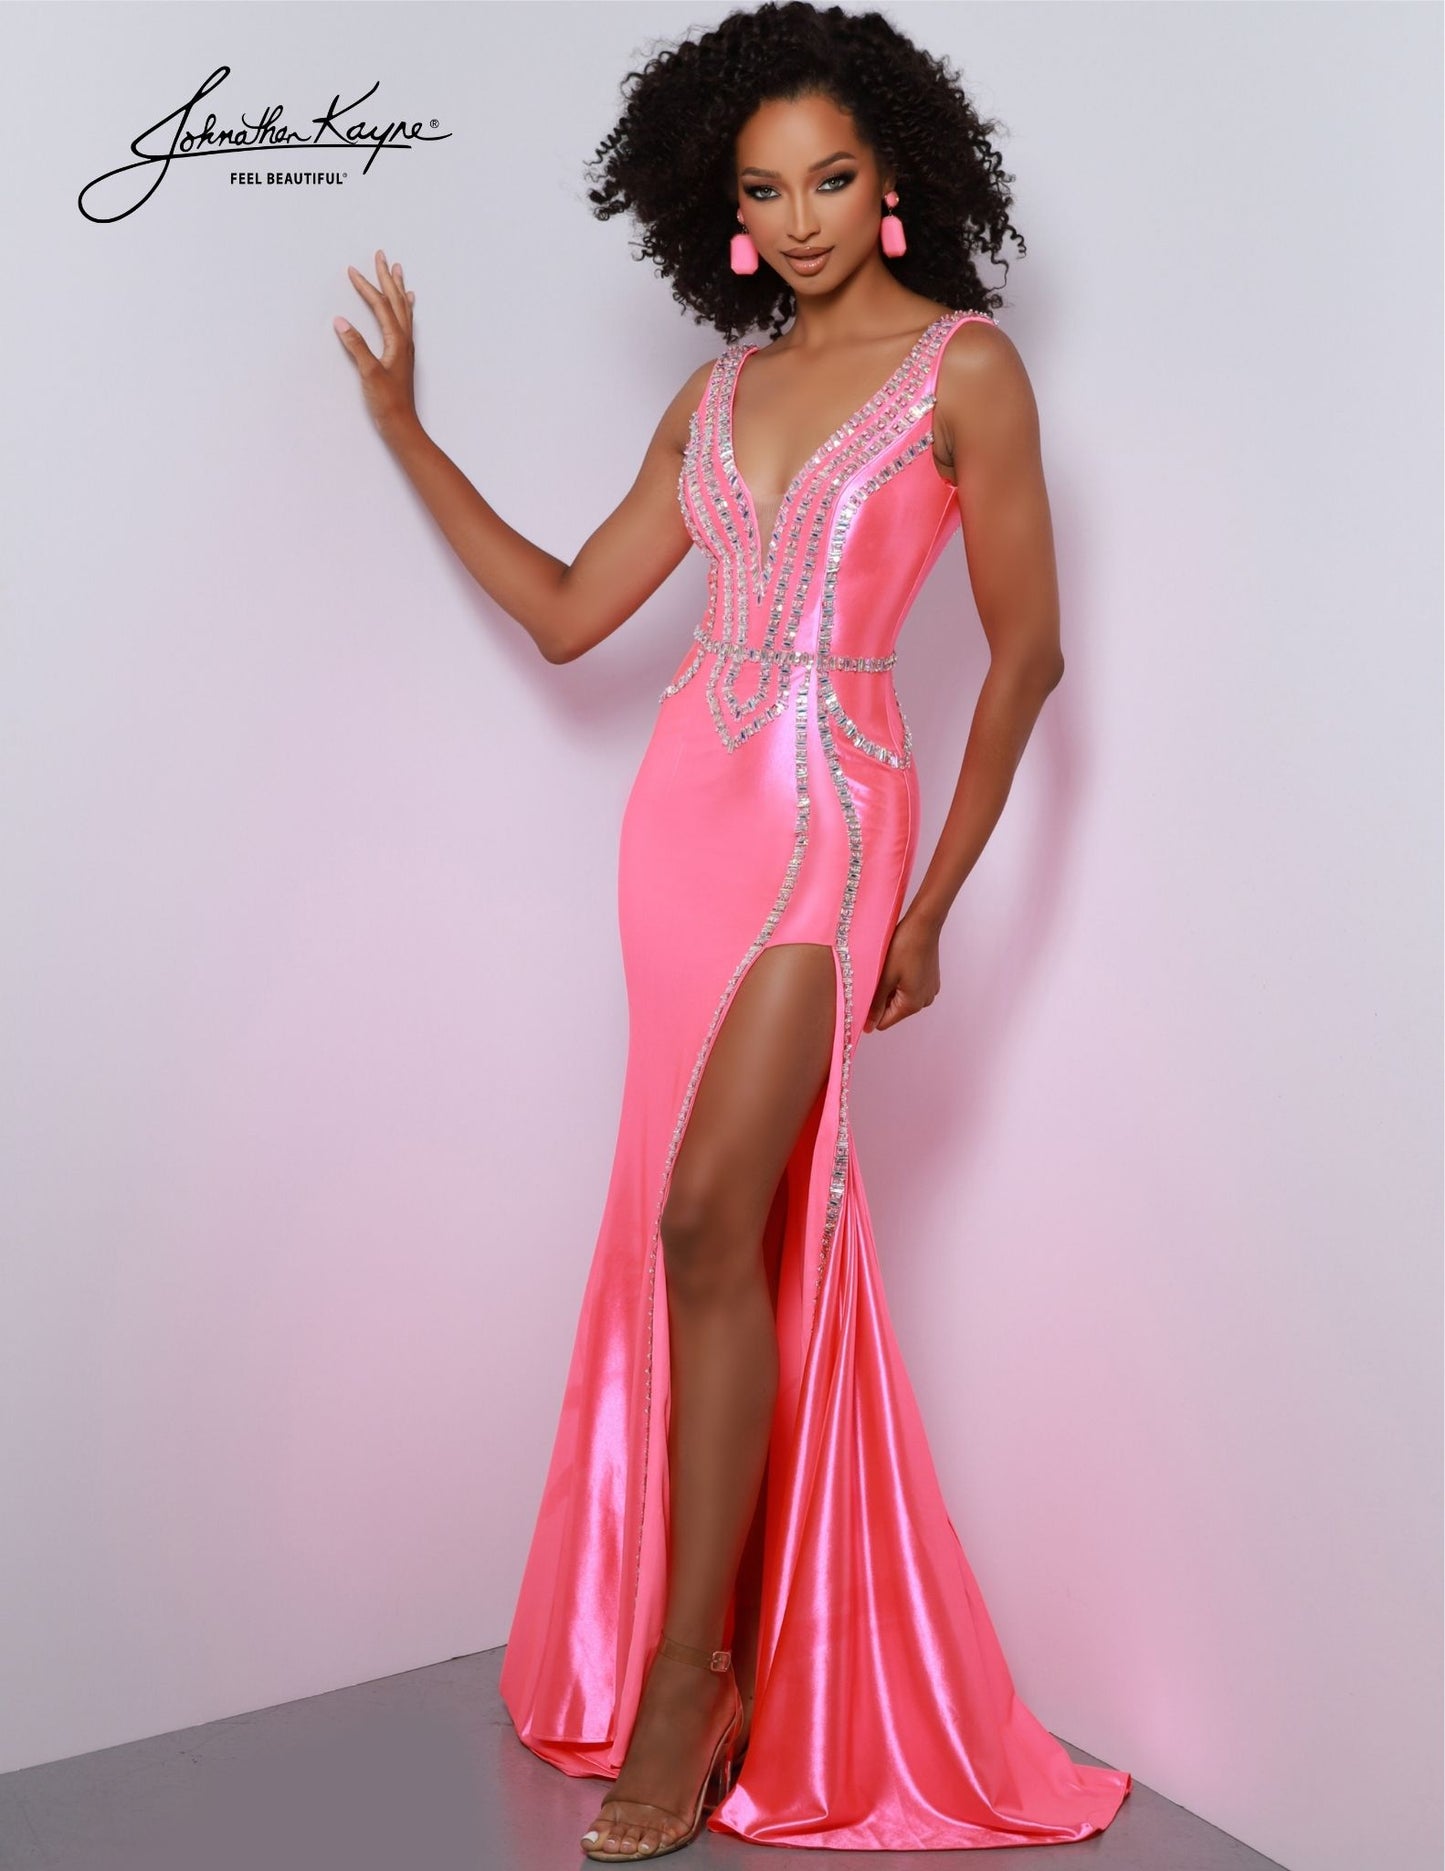 Look stunning at your next special event in the Johnathan Kayne 2867 dress. This gorgeous prom dress features a sheer deep V-neckline, beaded embellishments, and high side slit to show off your legs. The perfect formal gown for prom, pageants, or any special occasion. Raise eyebrows, drop jaws. Elevate your style and command attention in this Shiny 4 Way Stretch Lycra gown. The daring slit will ensure all eyes are on you.